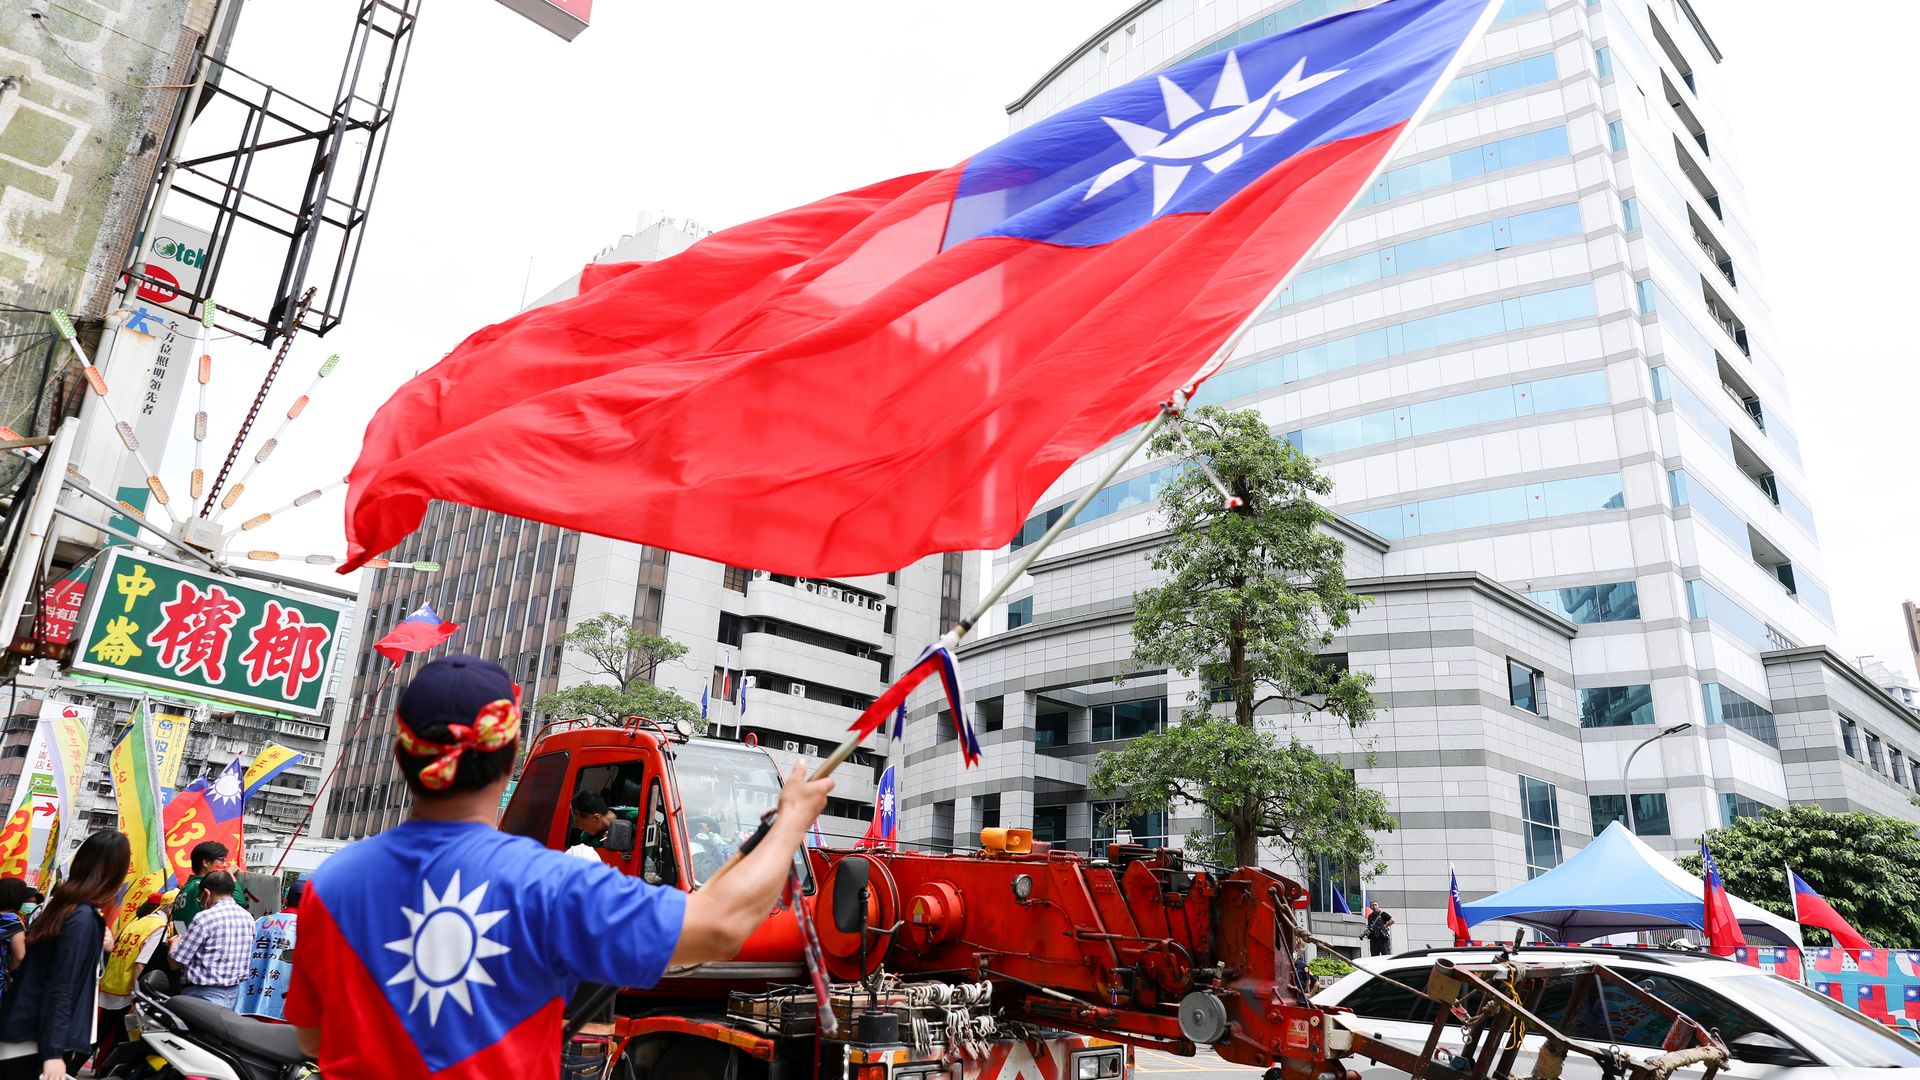 A supporter of the Kuomintang party waves a Taiwanese flag in Taipei, Taiwan, on Wednesday, May 17, 2023.